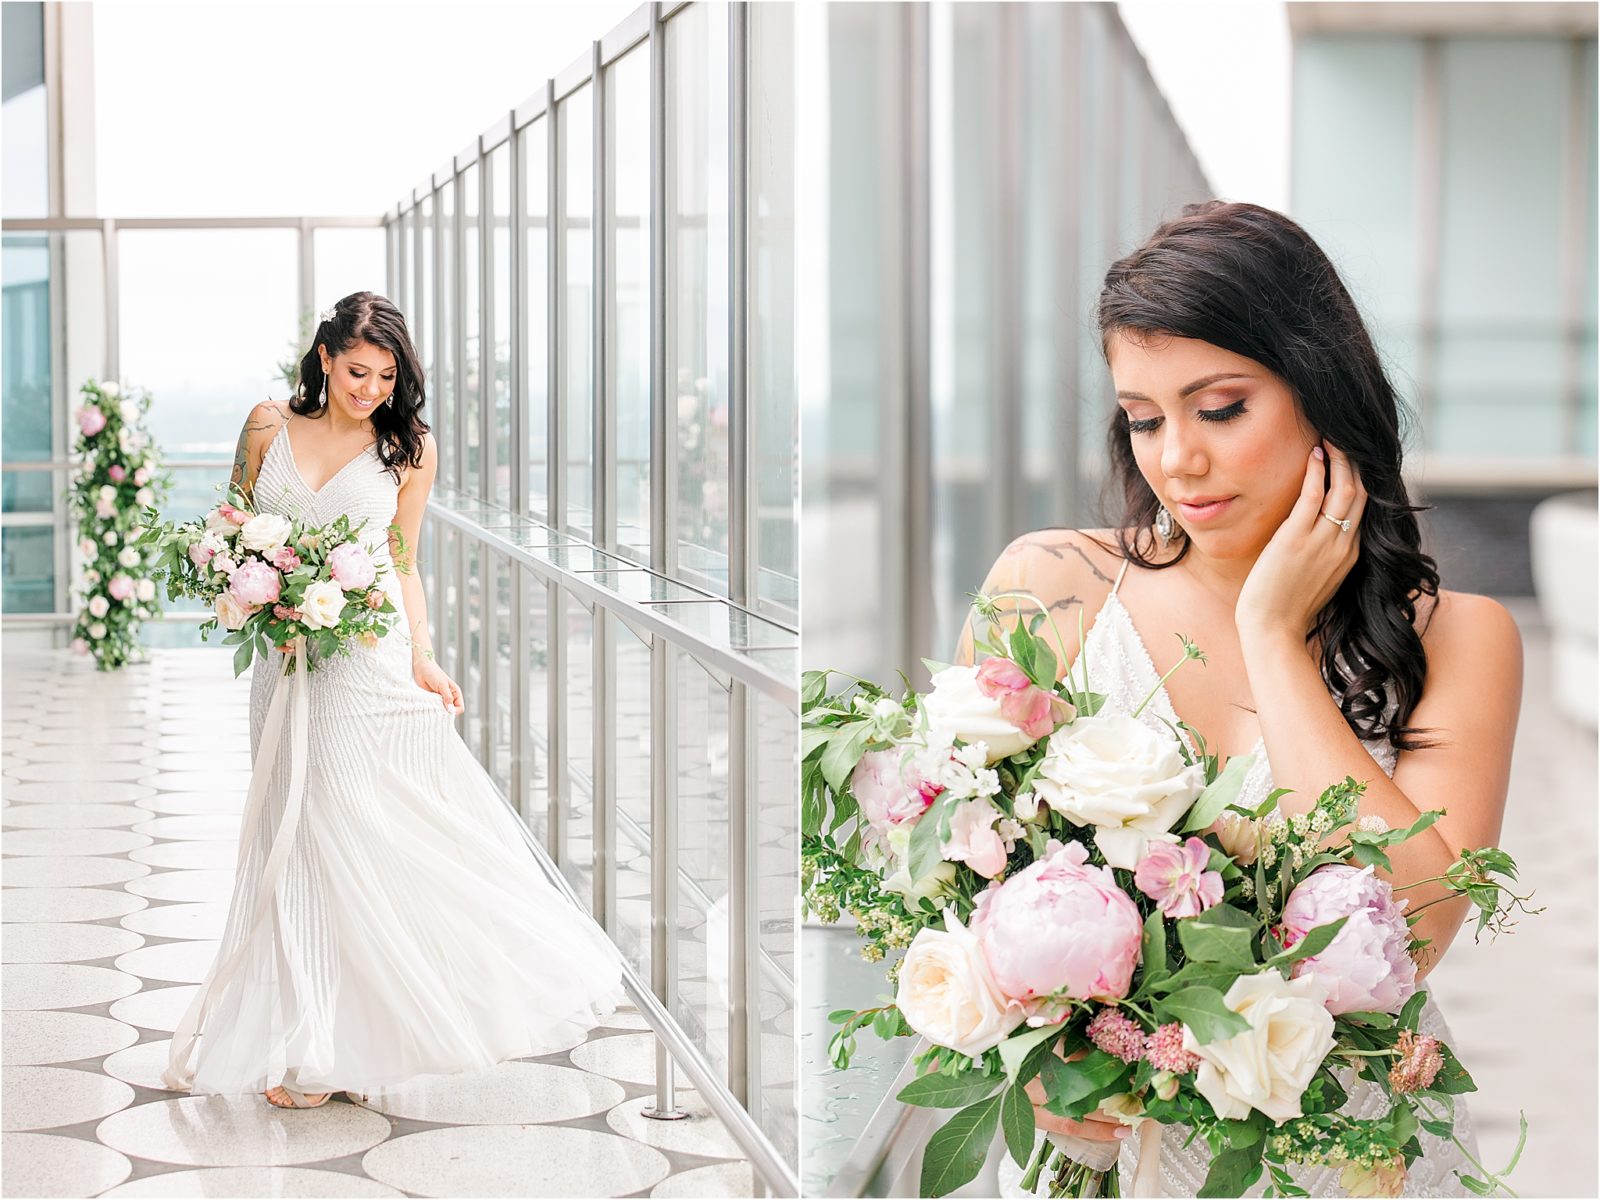 Bridal Session in Downtown Dallas by DFW Wedding Photographer Jillian Hogan based out of McKinney, TX 